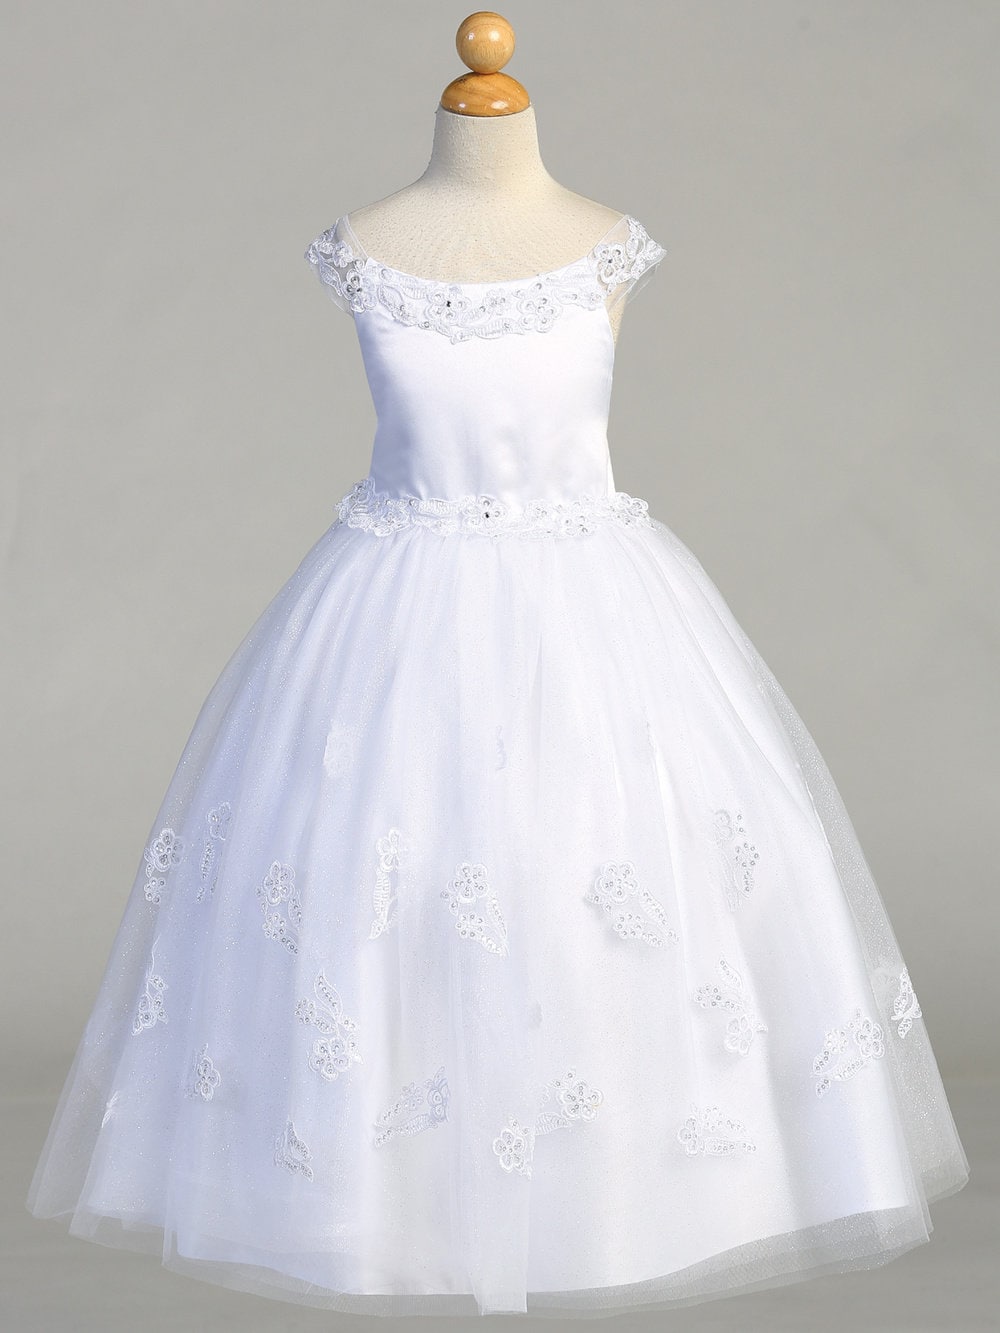 Back view of the First Communion Dress showing the zip fastening and bow tie.